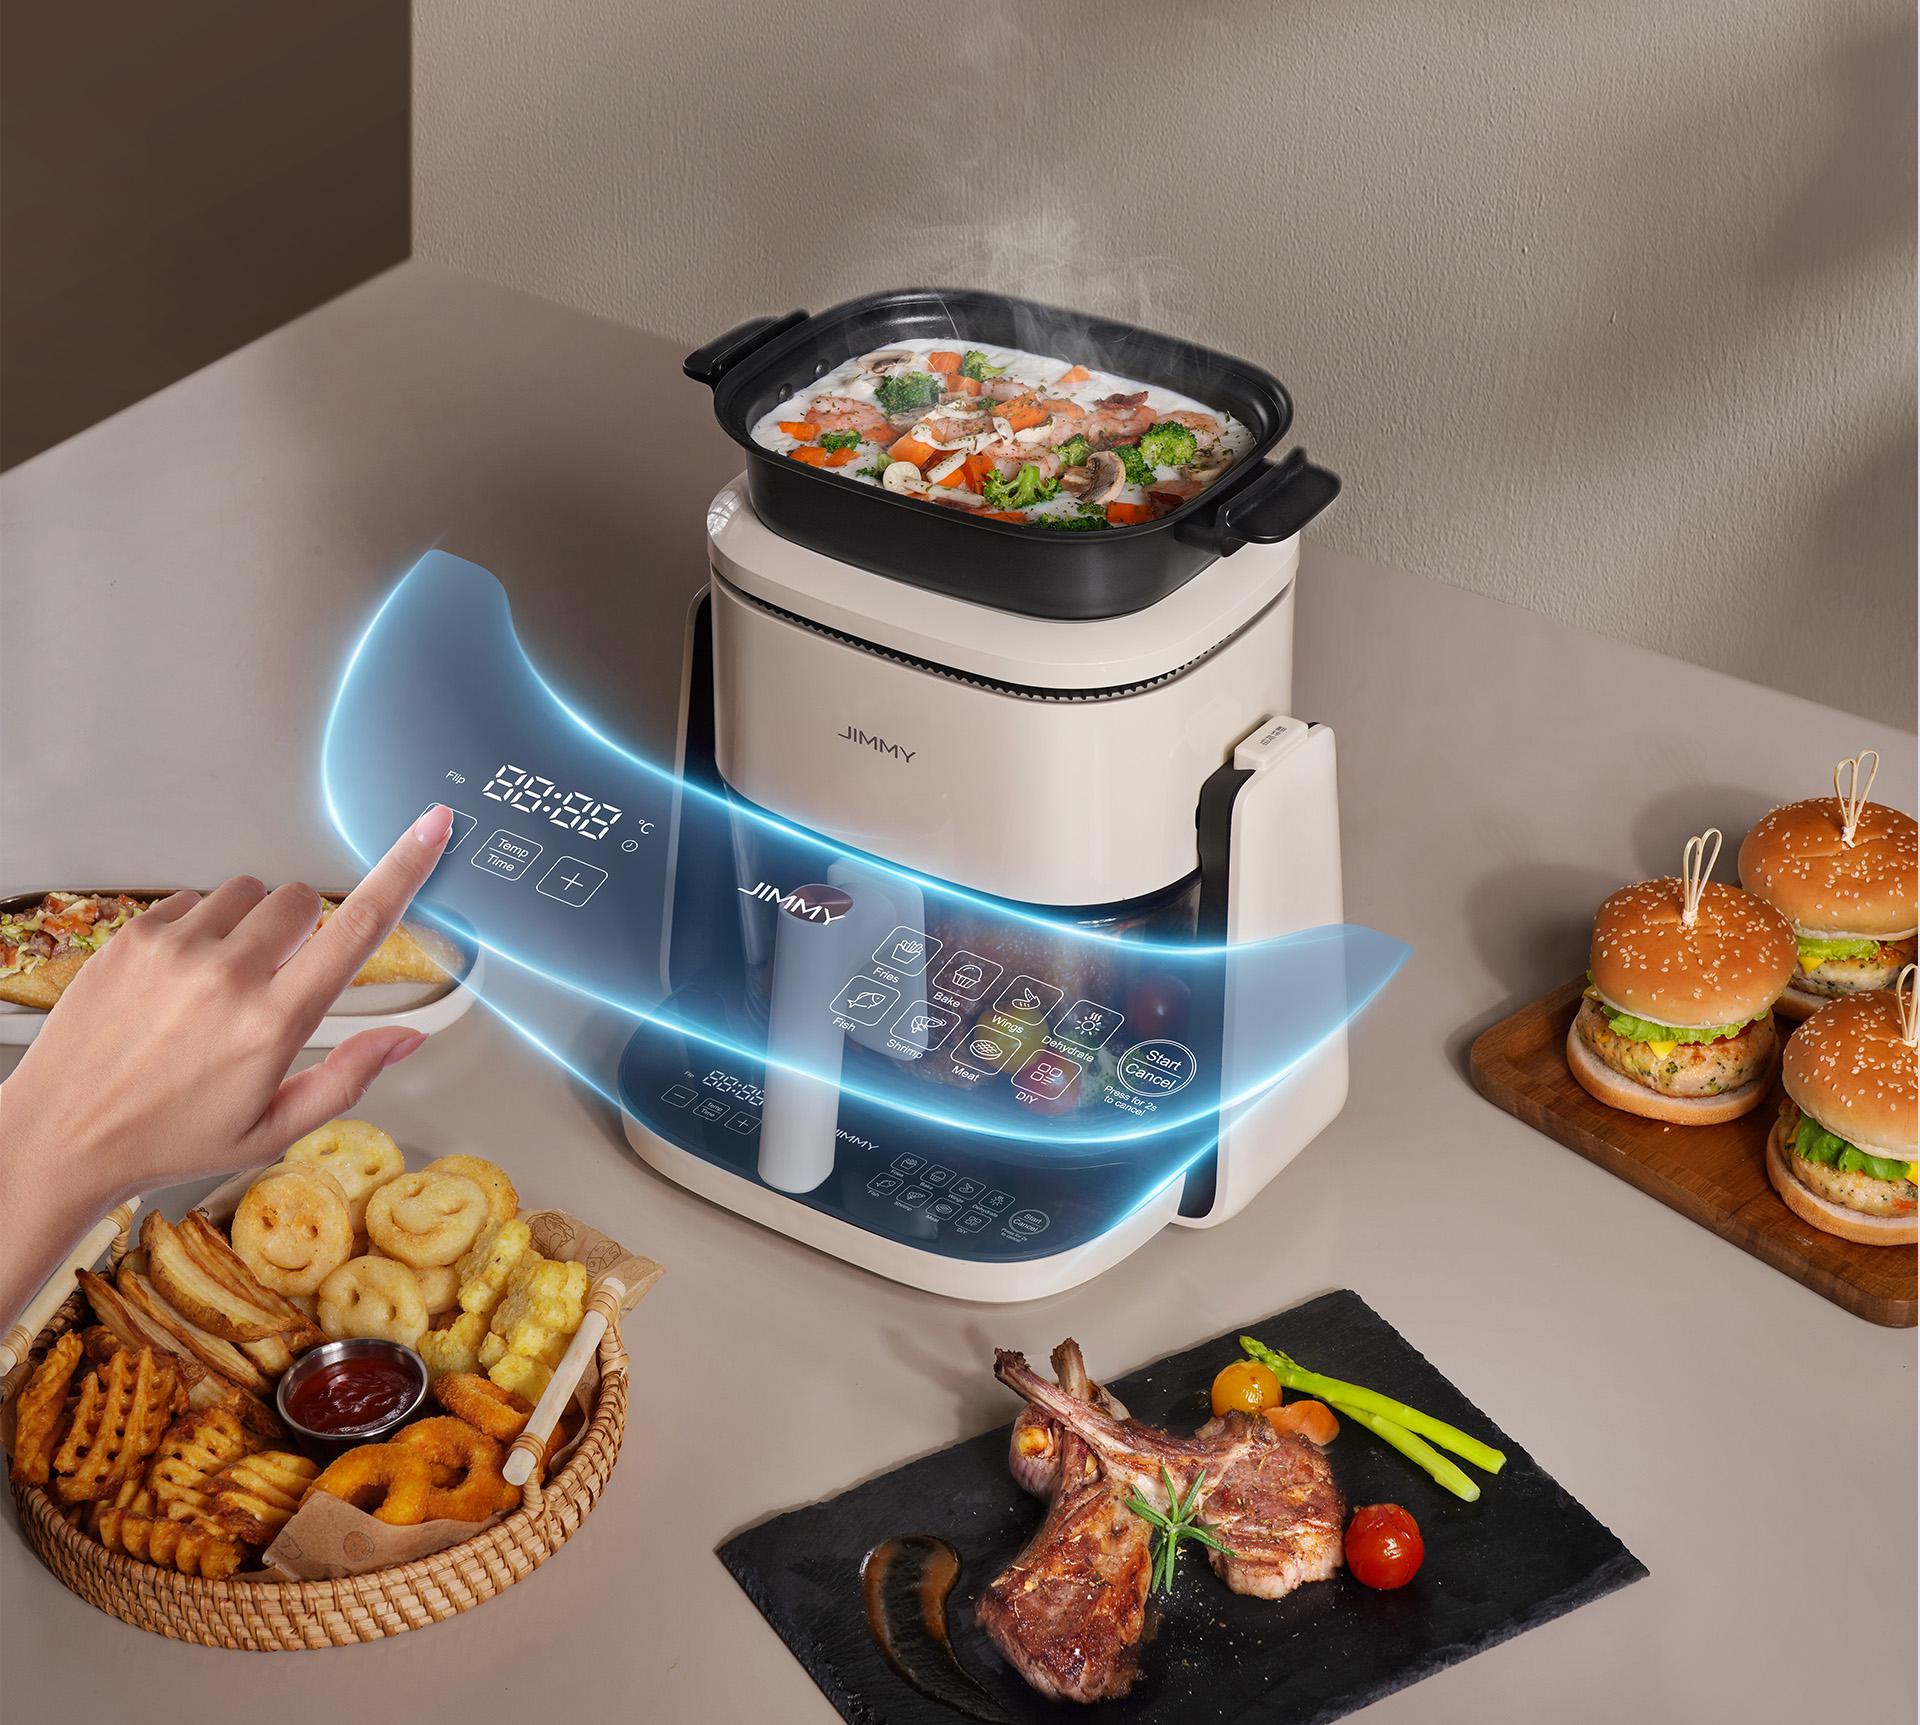 JIMMY AF3 air fryer HD touch screen